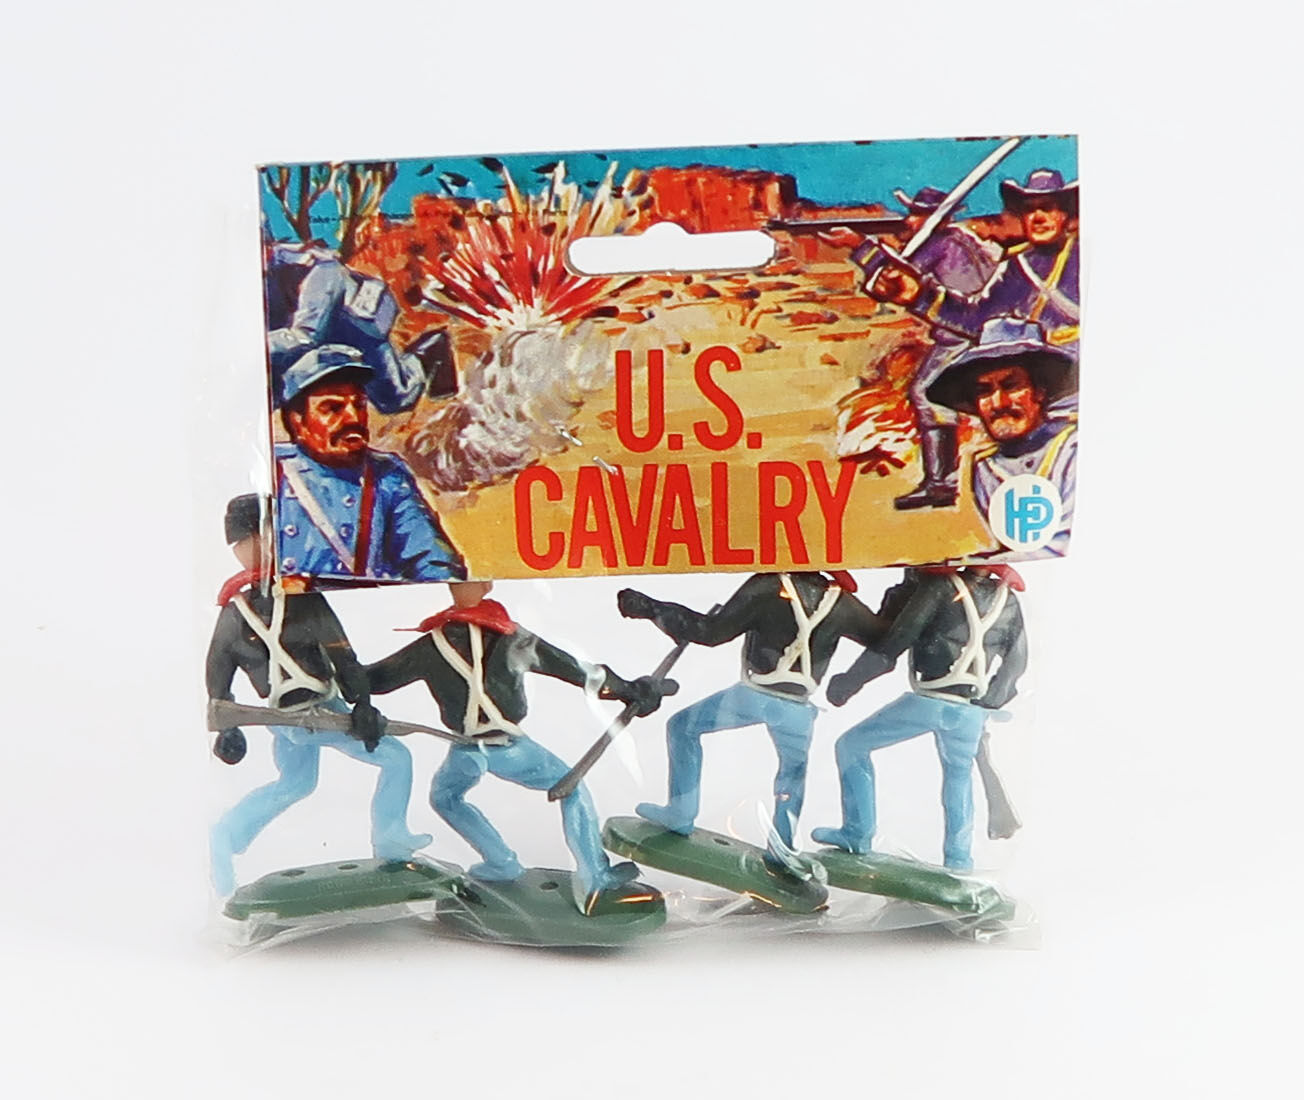 US Cavalry Union Soldiers